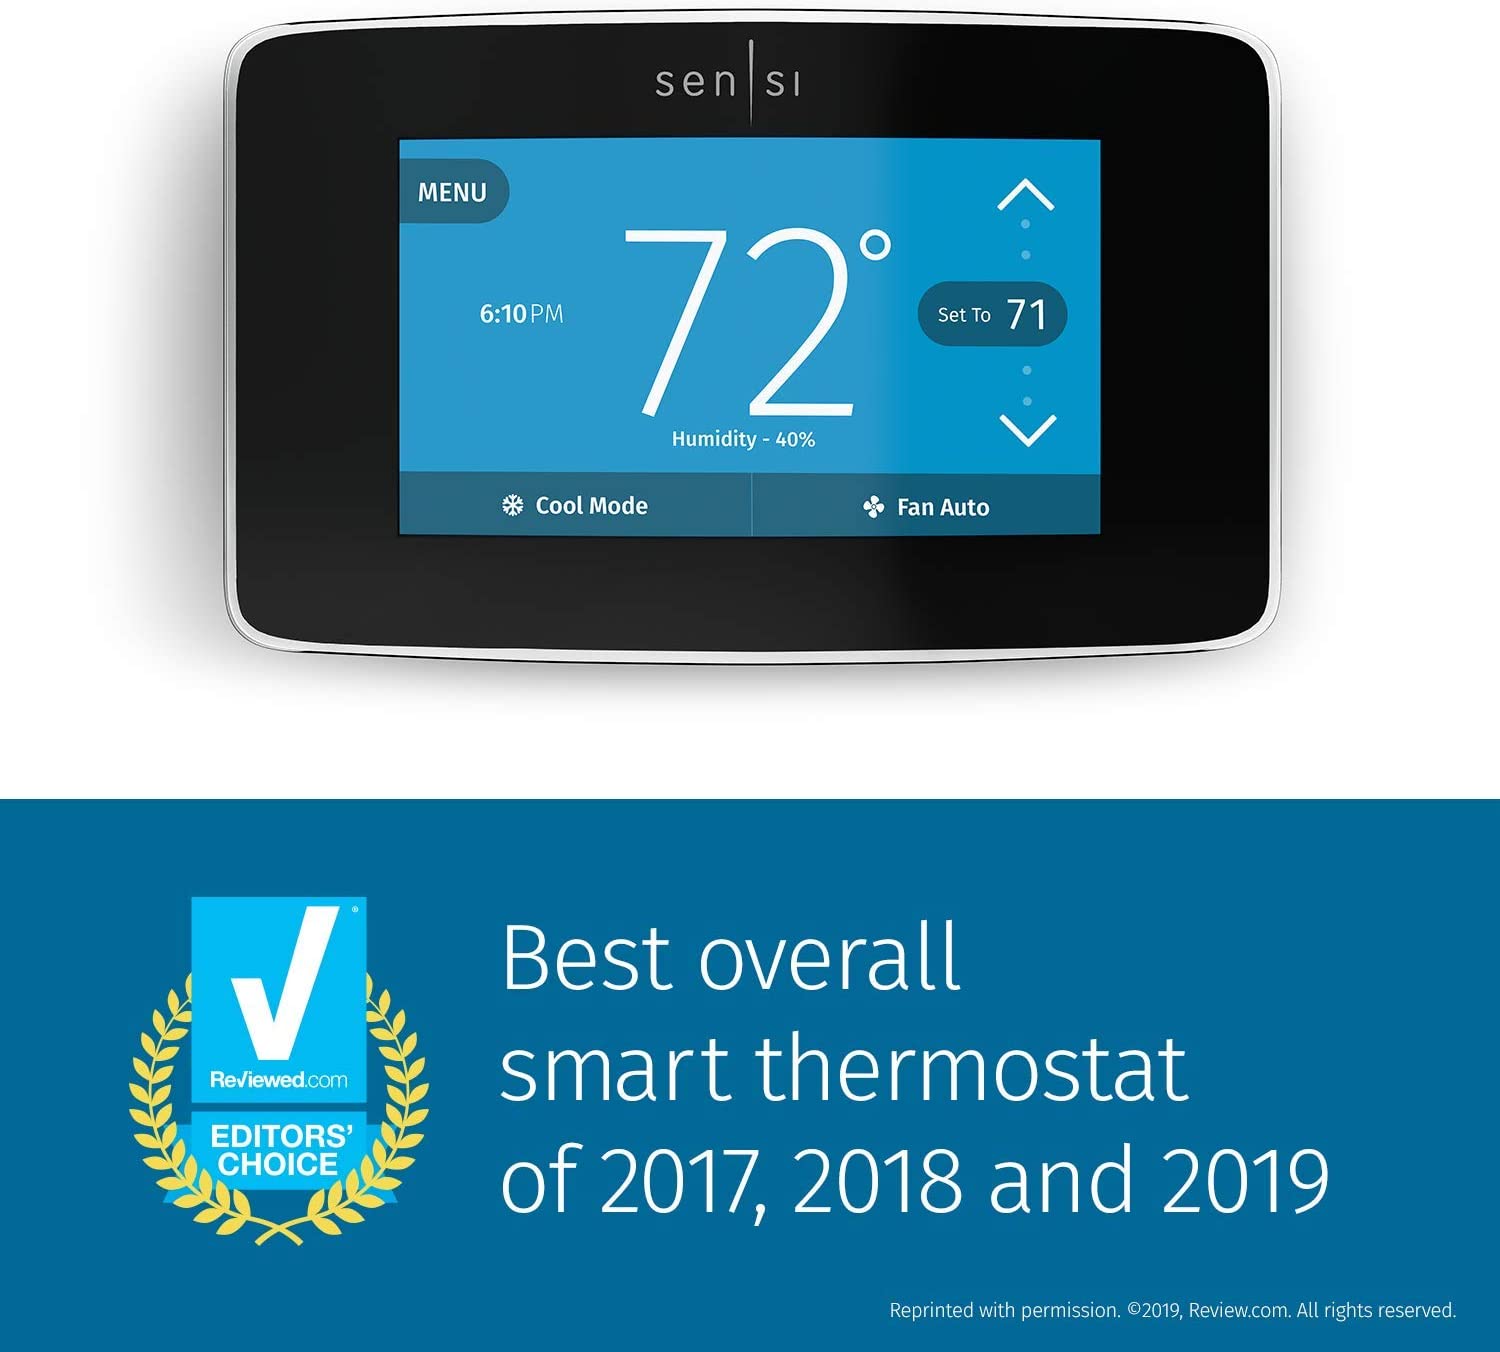 Sensi Touch Smart Thermostat by Emerson, ST75 - Black, C-Wire Required & Emerson F61-2663 Wall Plate for Sensi Wi-Fi Programmable Thermostat, White